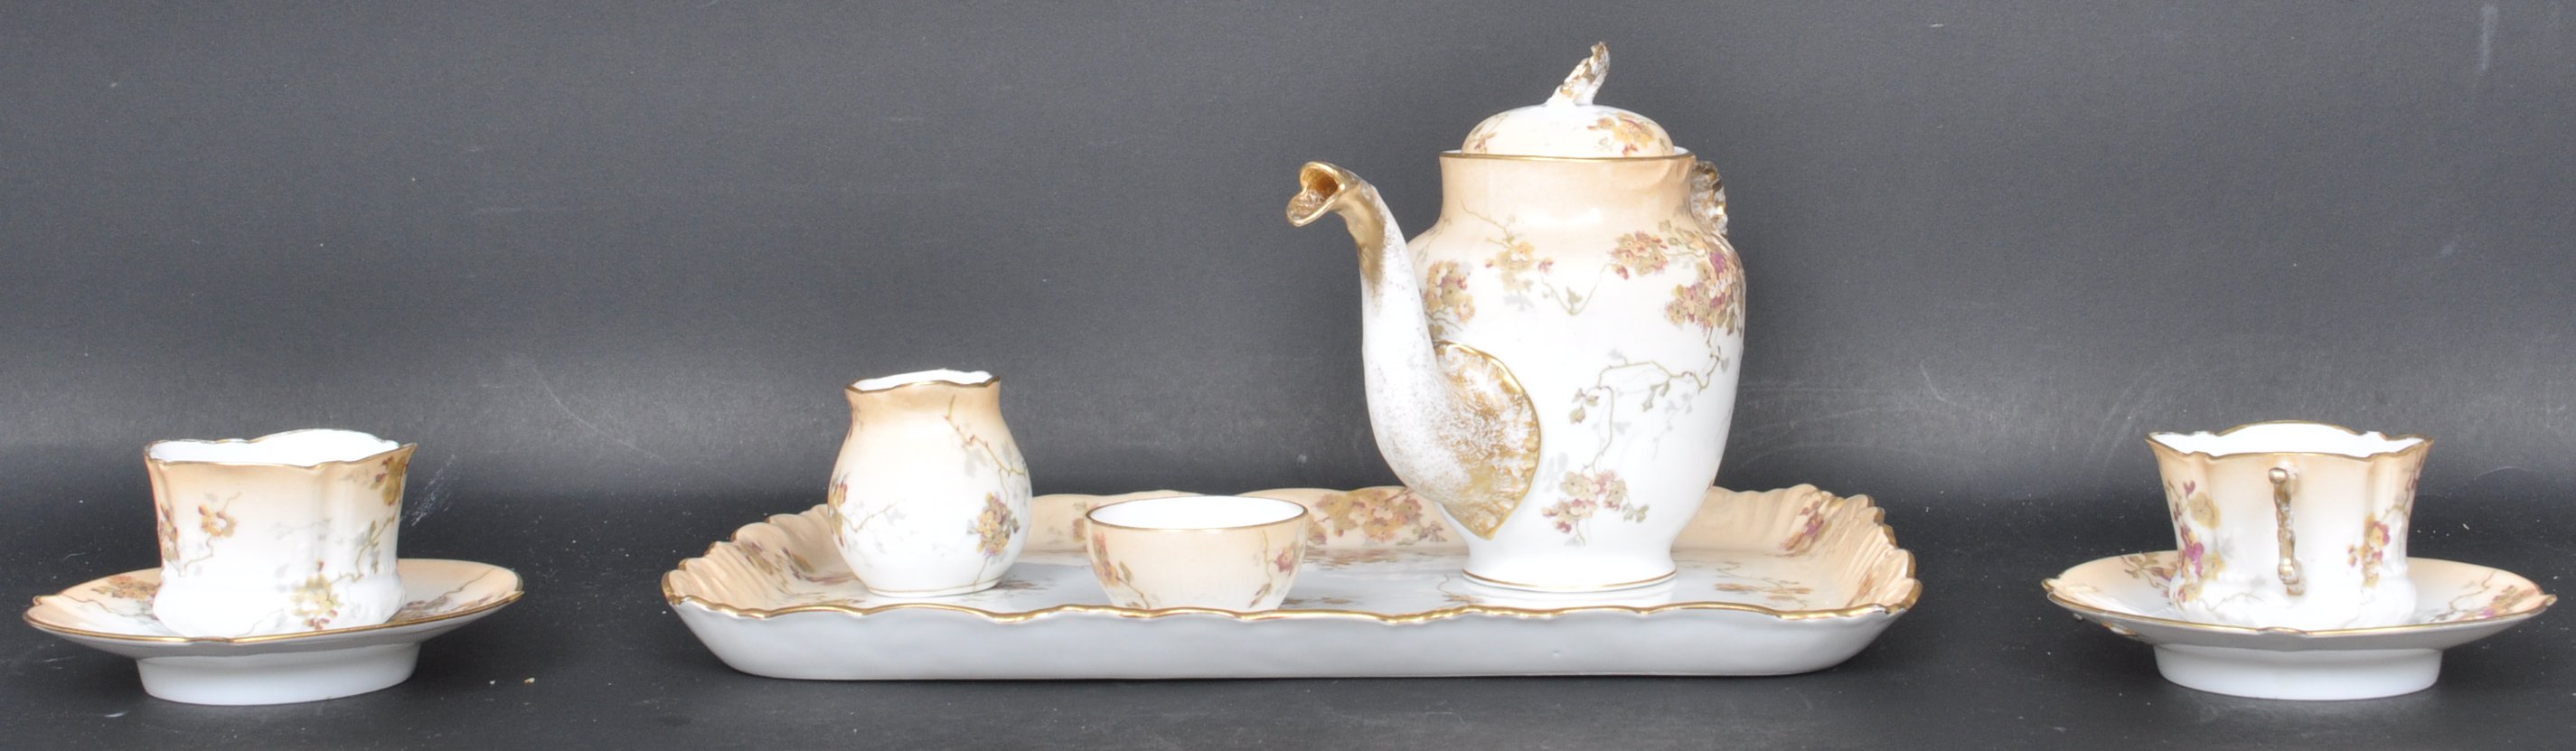 CIRCA 1900 LIMOGES 'TEA FOR TWO' CHINA SERVICE - Image 4 of 6